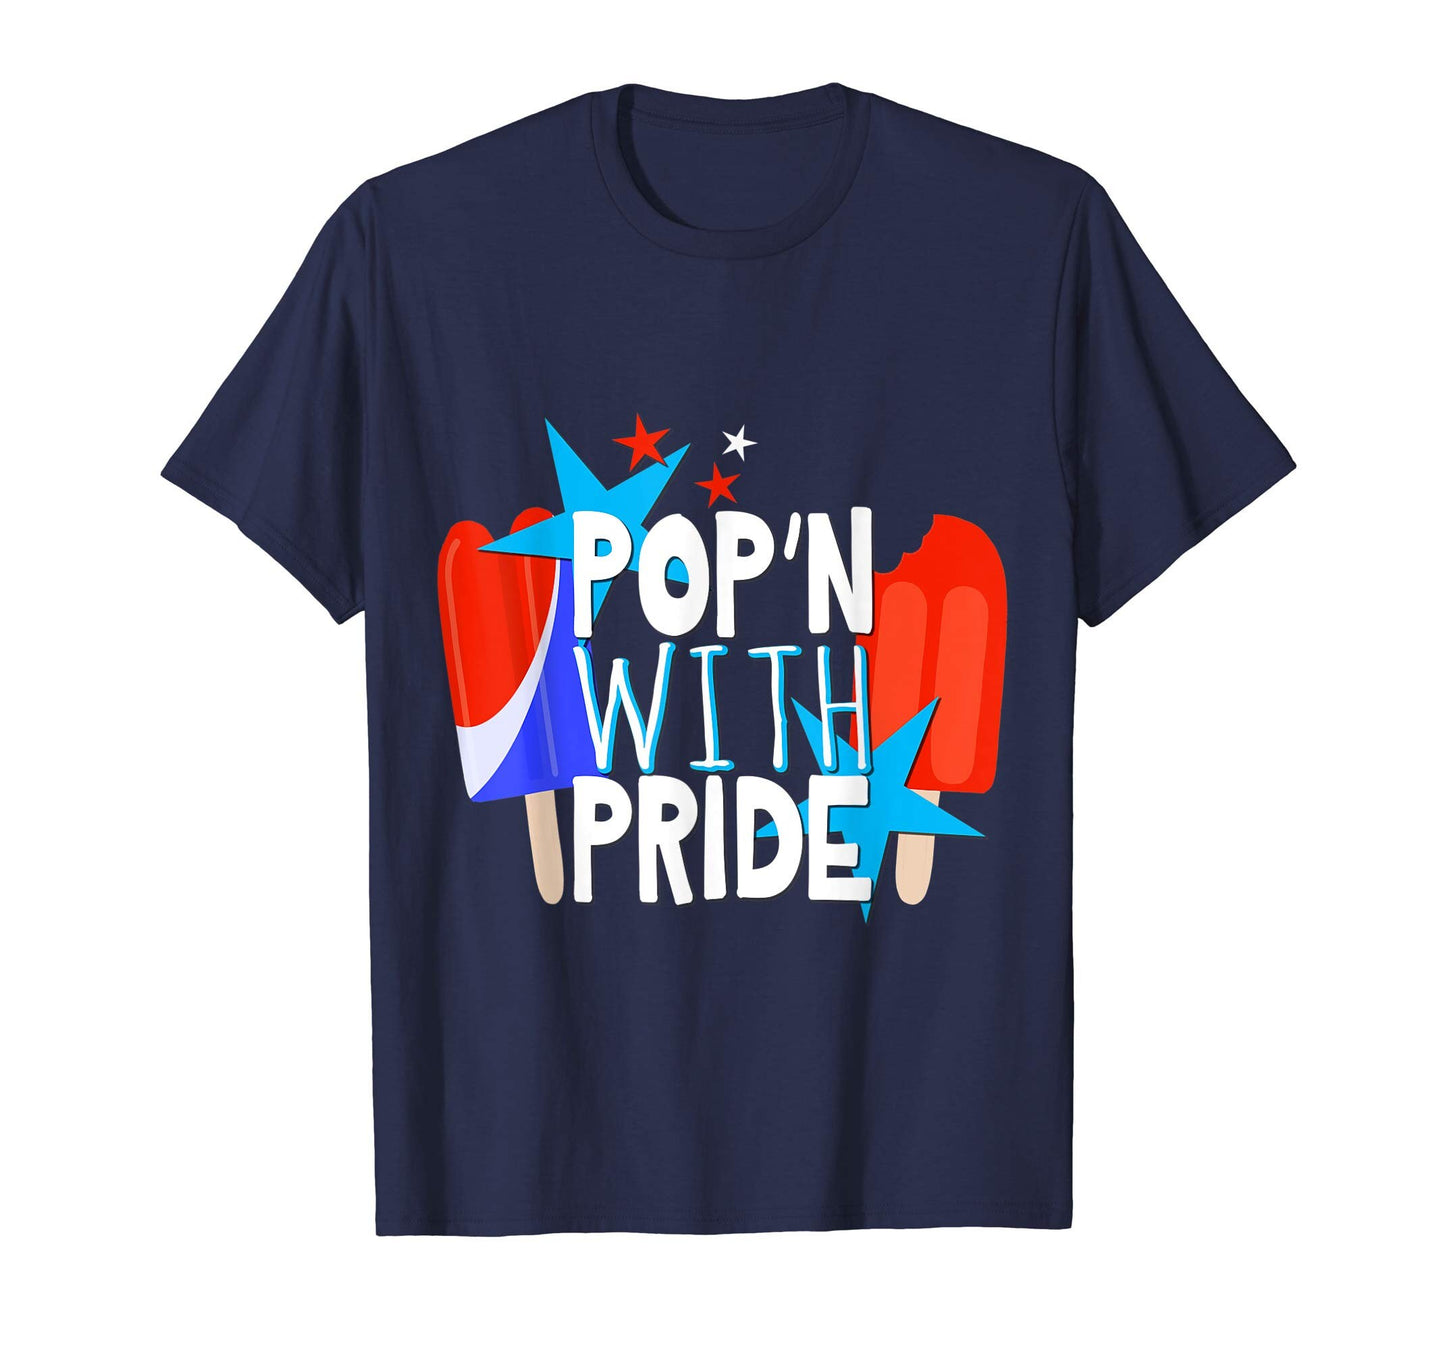 Pop'n With Pride Shirt, Ice Cream Popsicles, Stars and Stripes, USA Flag, July 4th T-Shirt, Independence Day, Red White and Blue Shirt